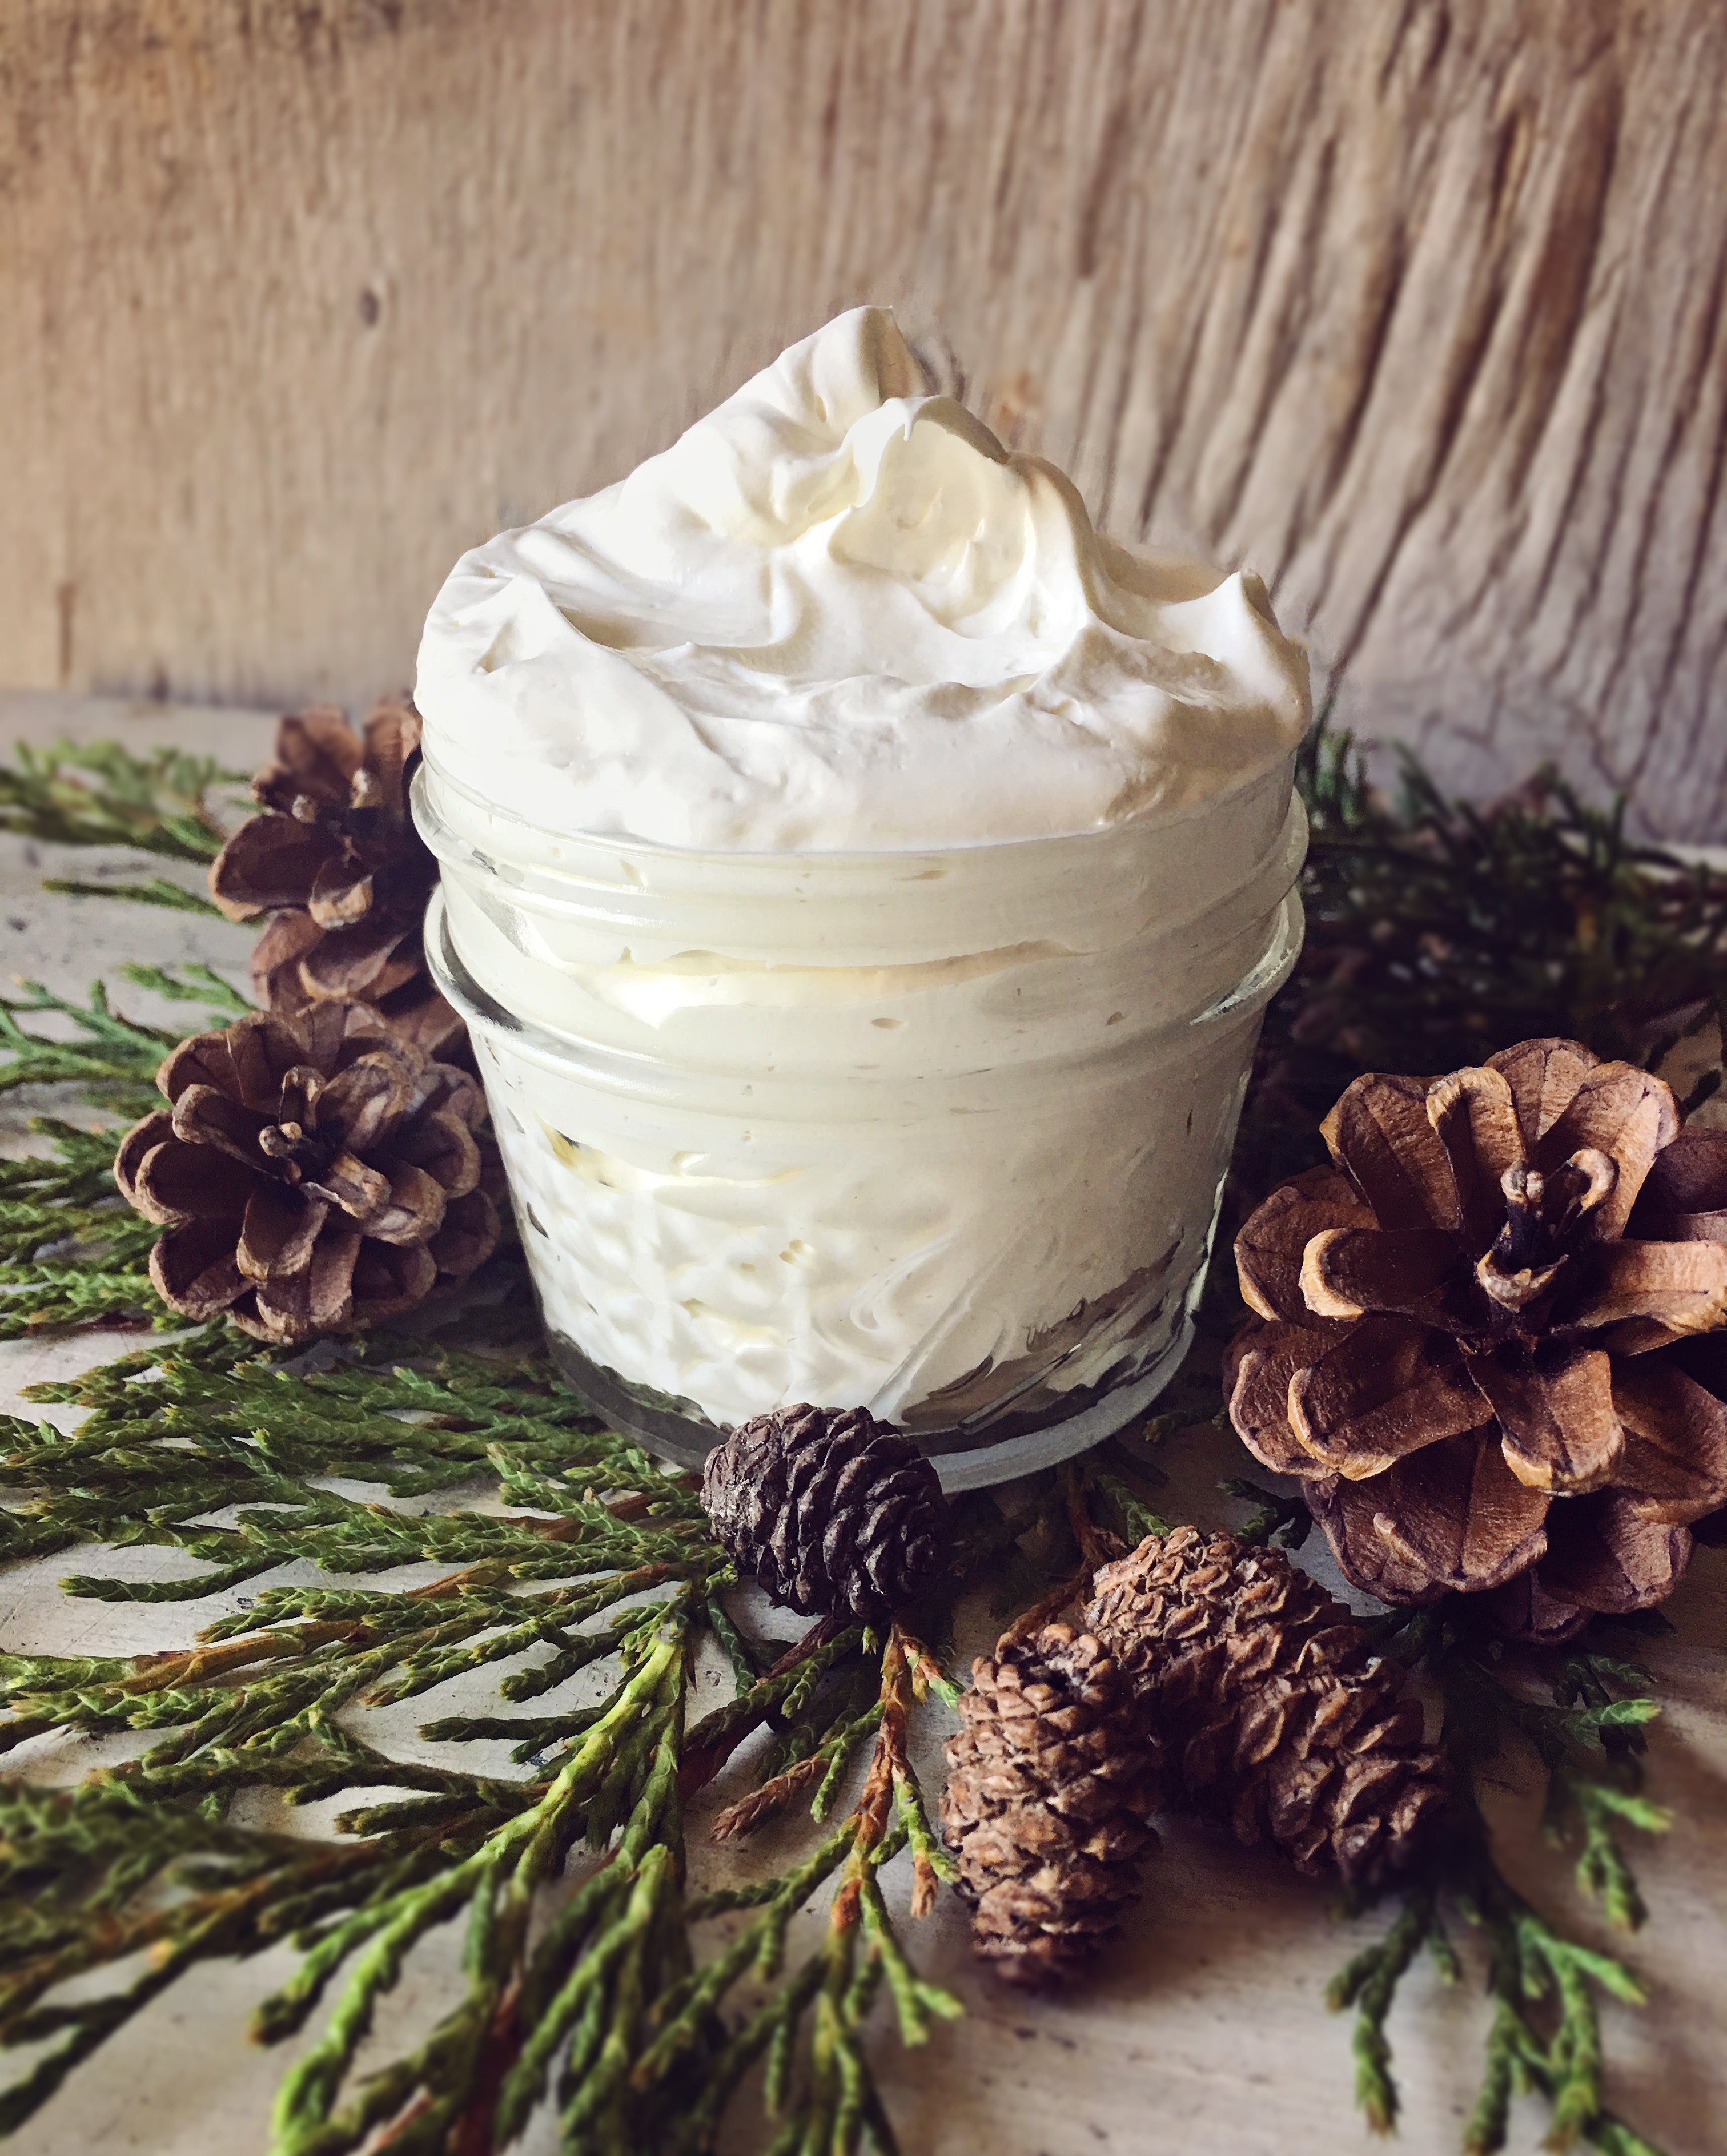 Patchouli and Wild Orange Whipped Body Butter